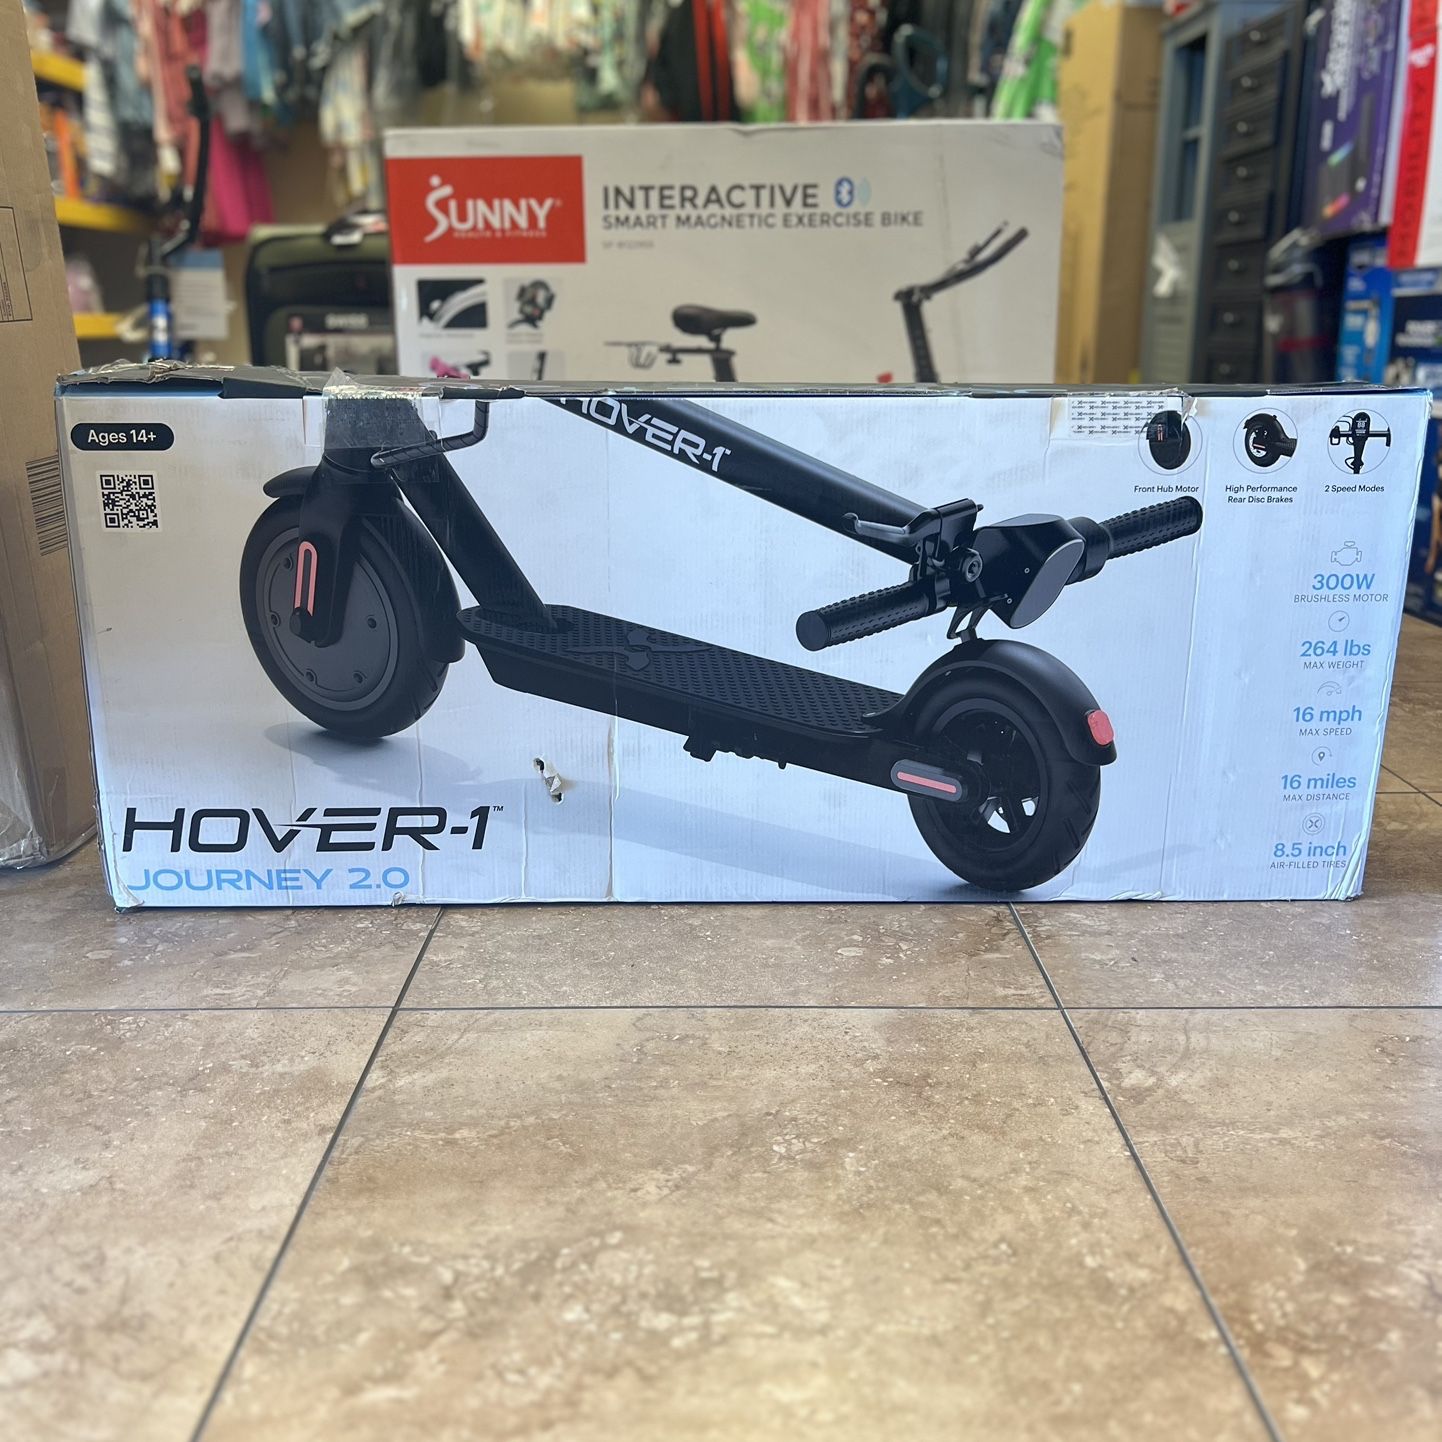 New Hover-1 Journey 2.0 Self Balancing Electric Scooter for Teens, 16 mph Max Speed, UL 2272 Certified, Black